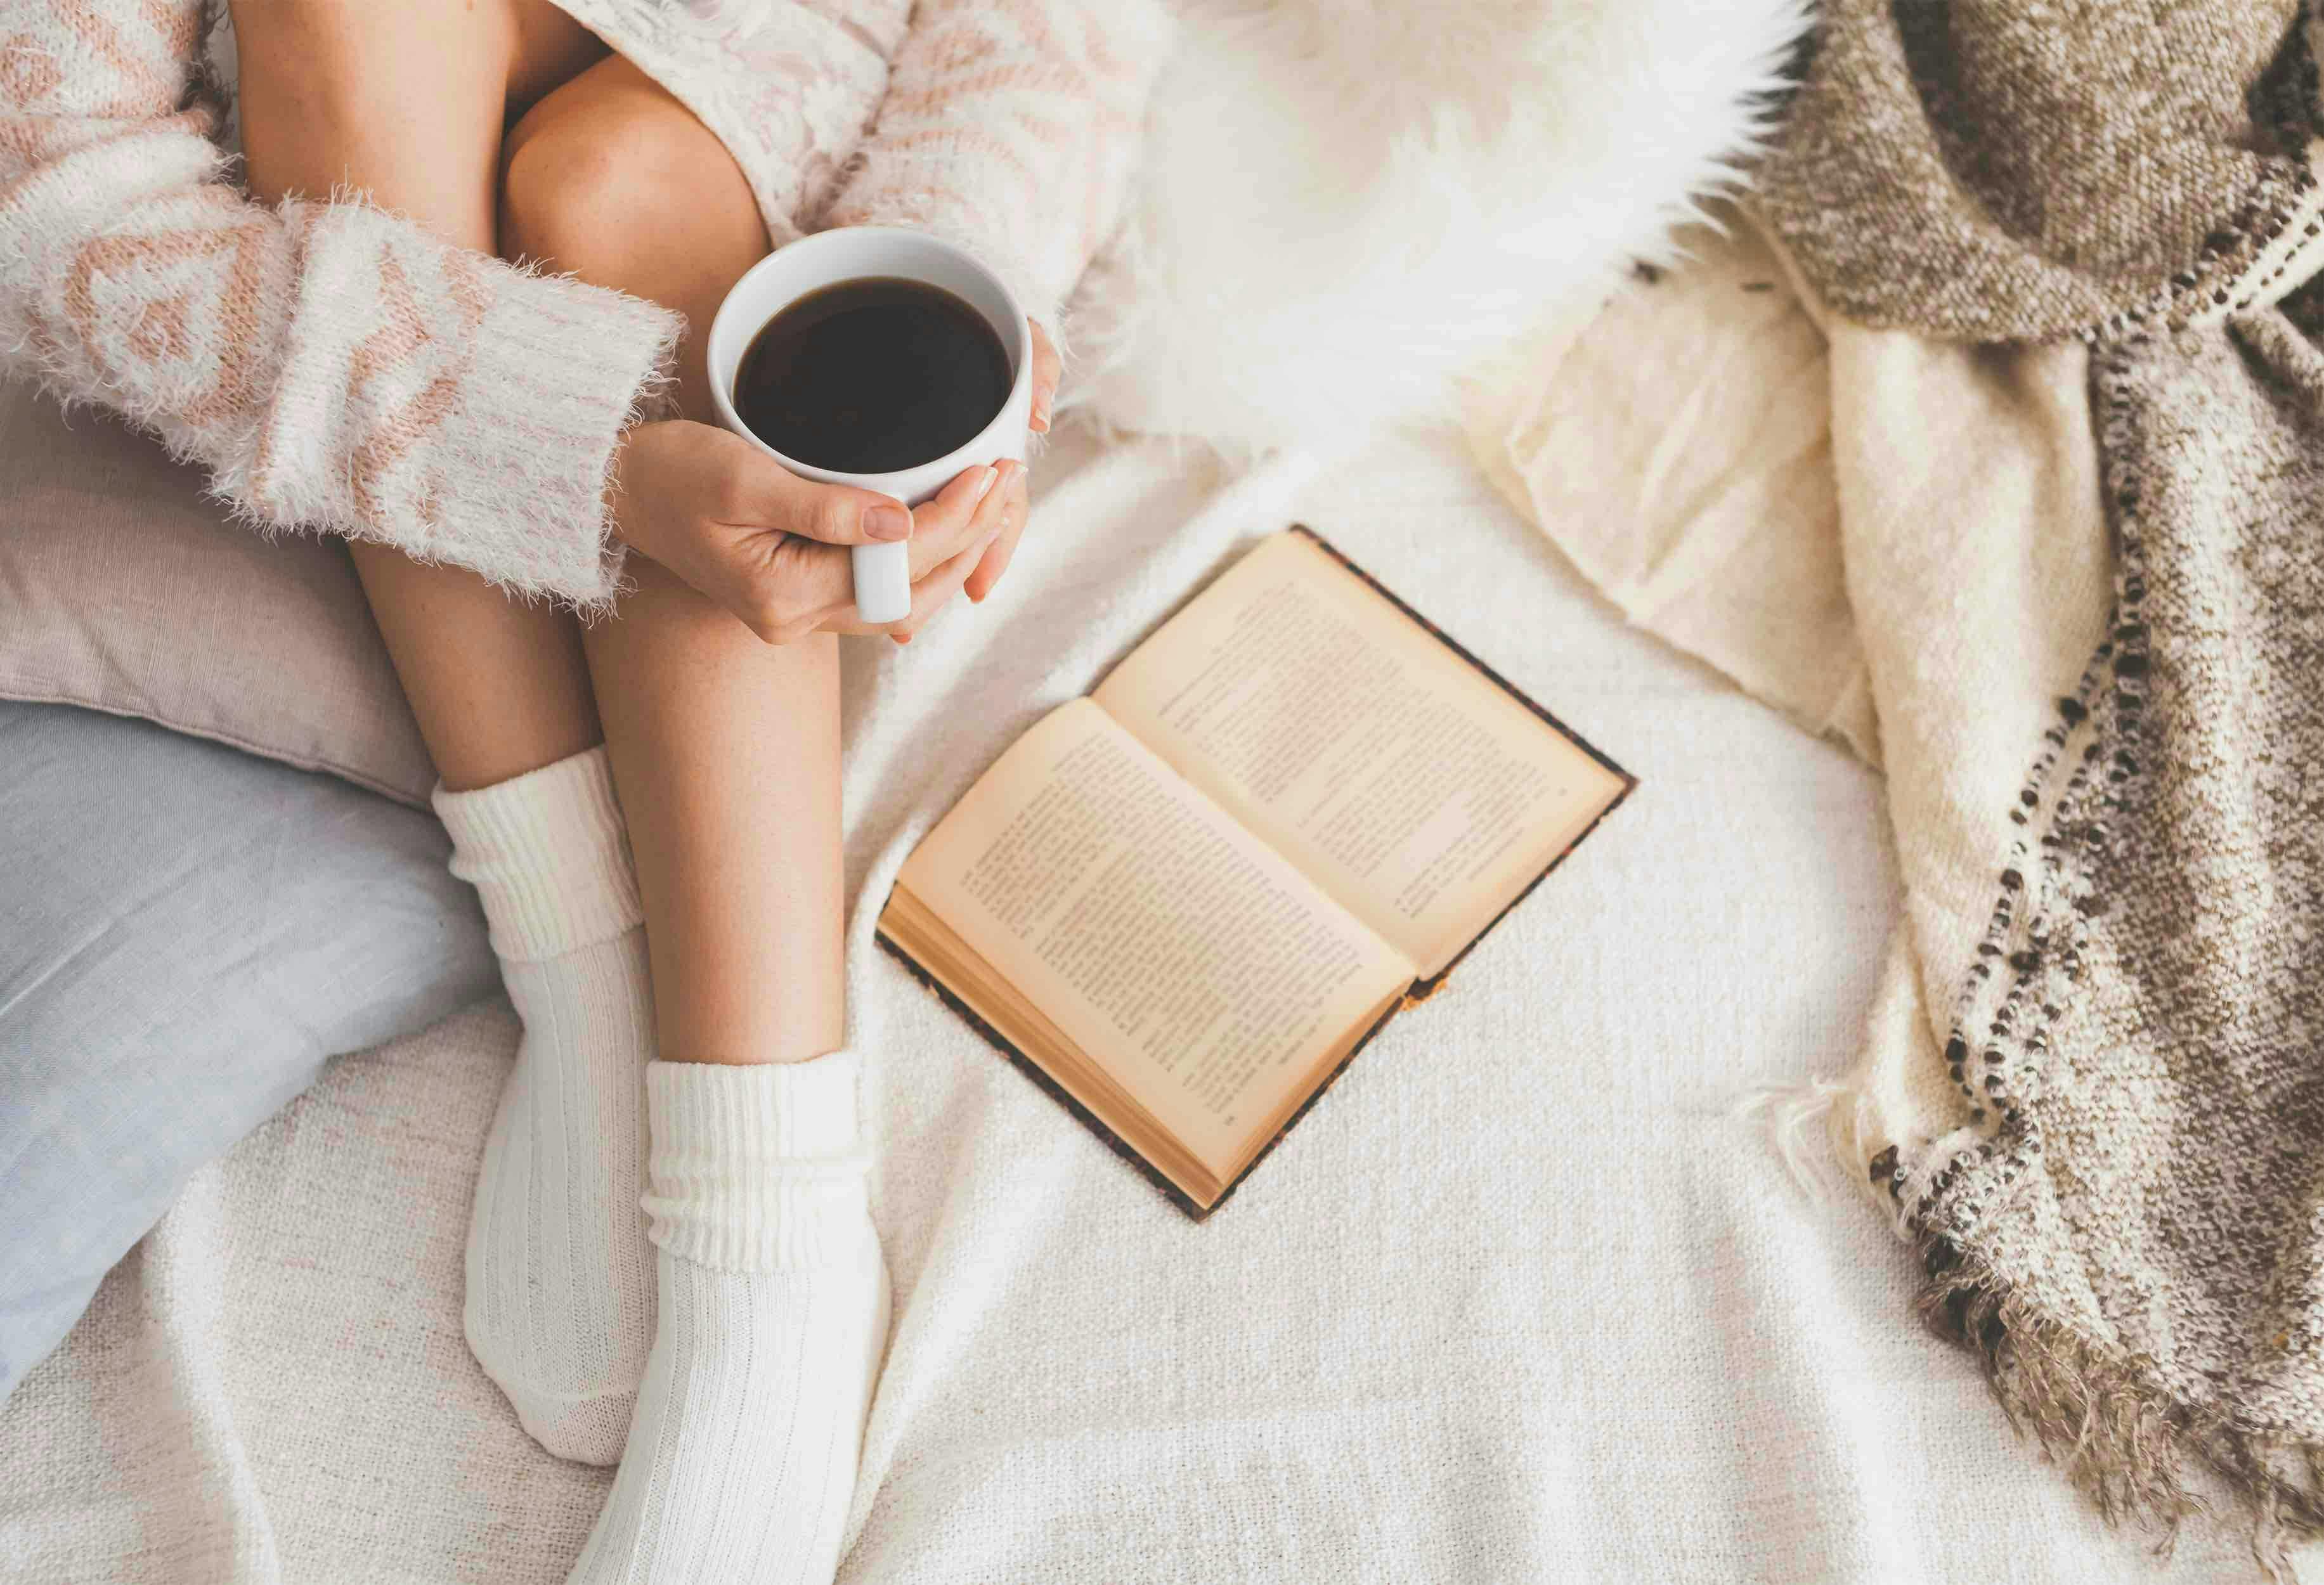 bed,wool,hands,beauty,cozy,woven,american,beautiful,view,white,legs,gentle,sweater,soft,vanilla,still,old,european,socks,girl,morning,warm,light,vintage,heated,breakfast,cup,woman,young,book,hipster,wear,winter,cold,cute,life,interior,top,indoors,teenager,rest,knitted,legwarmers,homely,bedroom,comfort,home,coffee,pillow,time,woolen book publication person reading clothing hosiery sock blanket coffee coffee cup